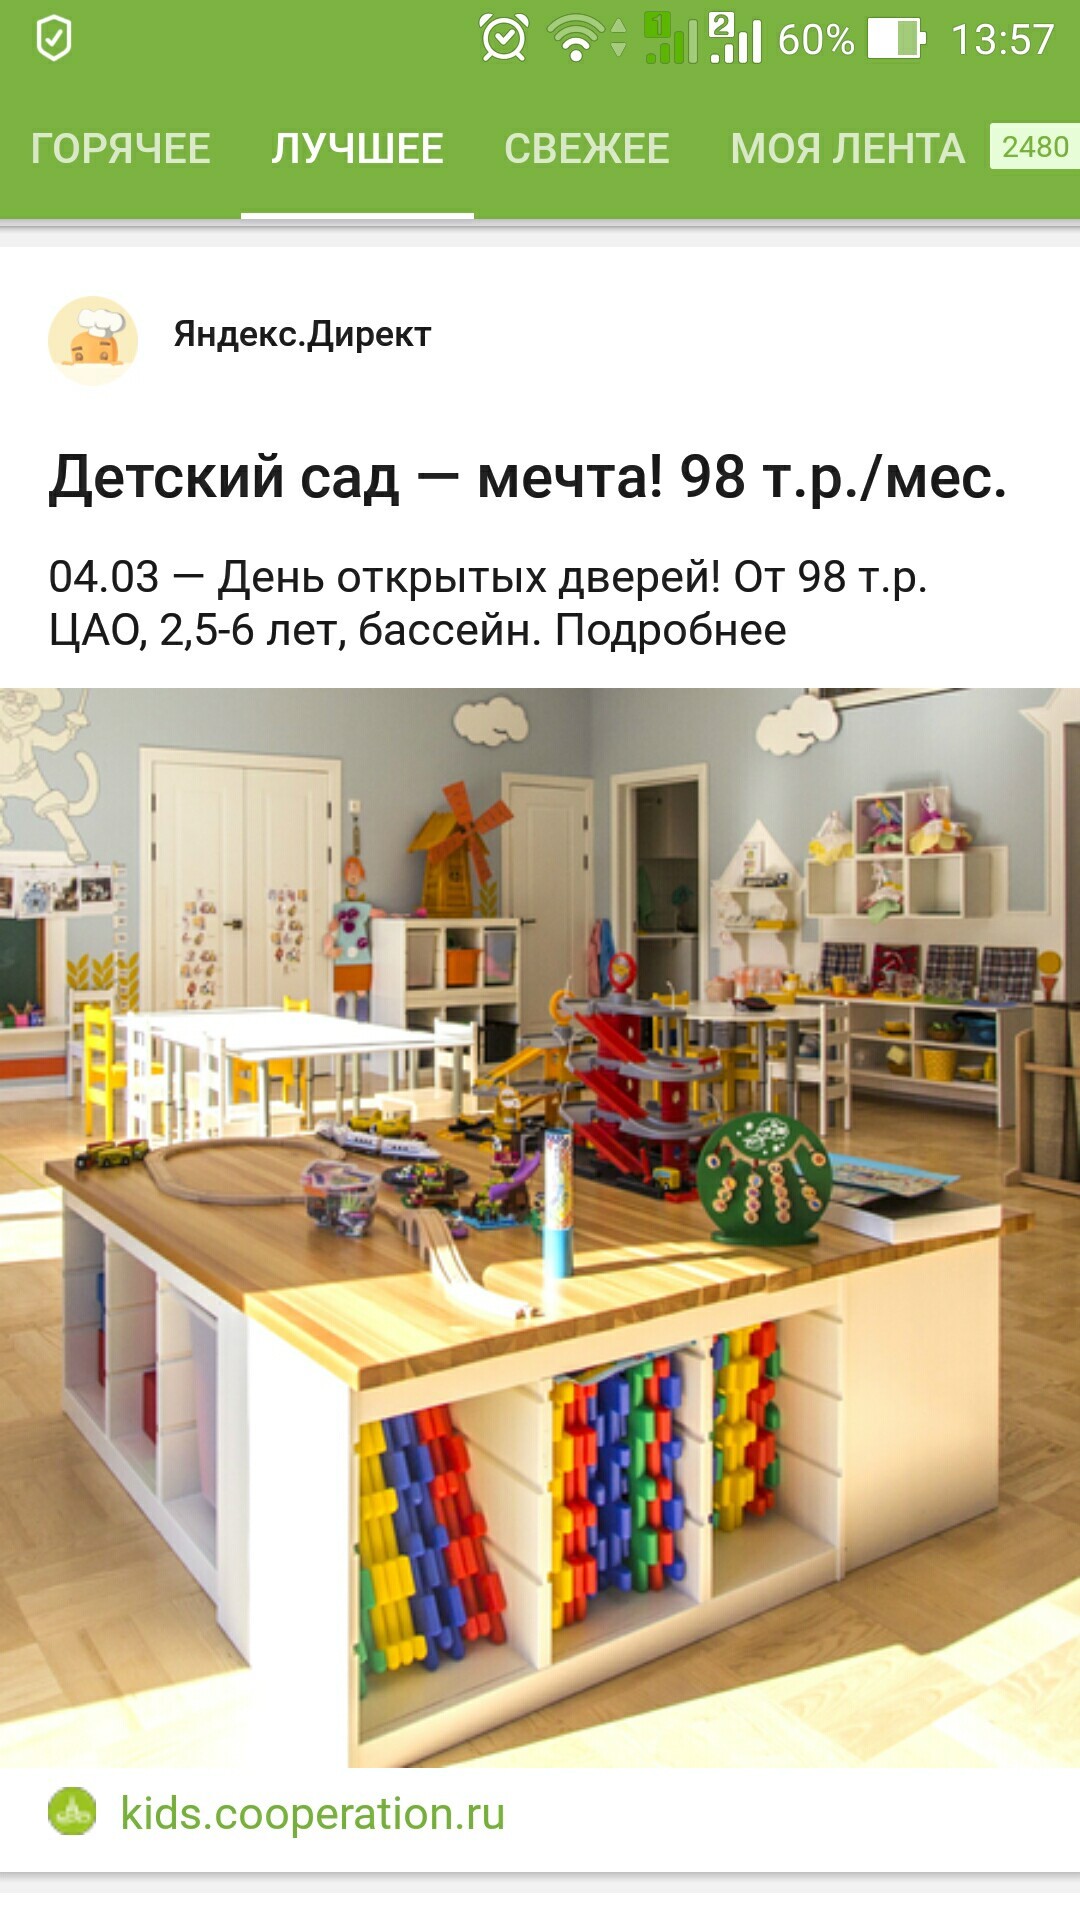 The meaning of life or a moment of despair - Salary, Family, , Yandex Direct, Kindergarten